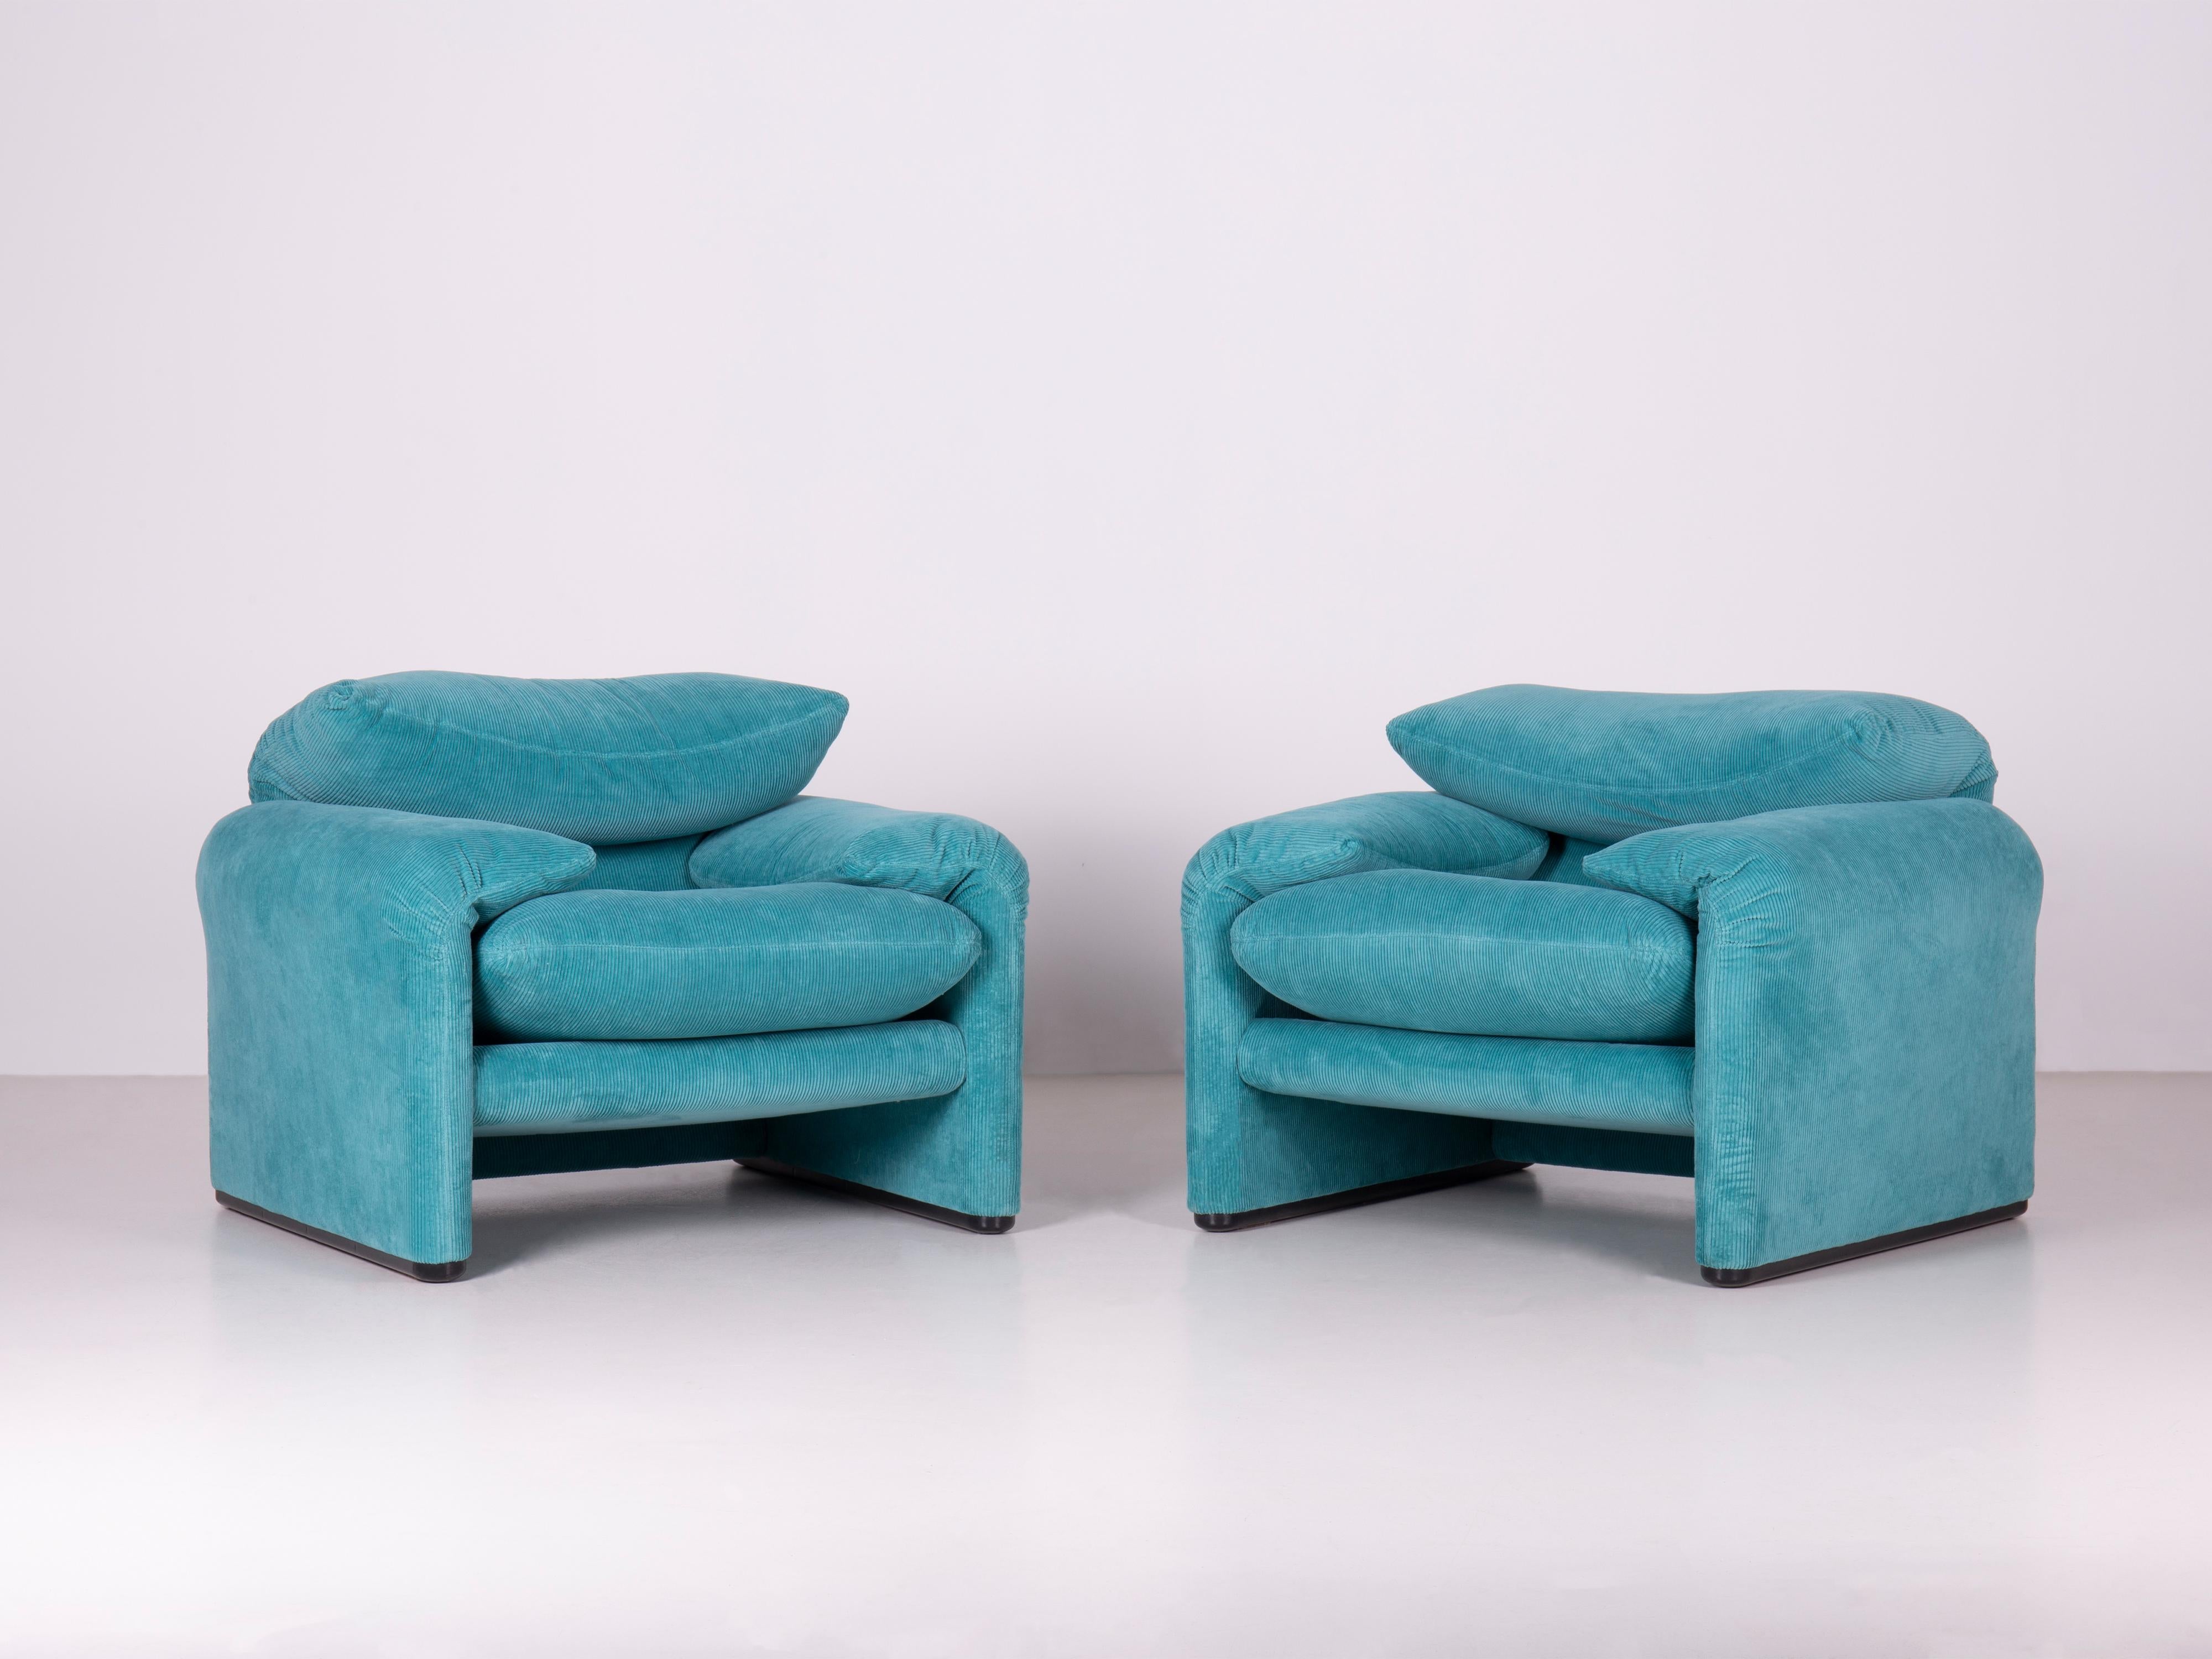 Pair of Maralunga armchairs designed in 1973 by Vico Magistretti, coming from the first Cassina production (early Seventies), recently upholstered with corduroy. 

Enveloping design, soft and comfortable shapes distinguish Maralunga. A bicycle